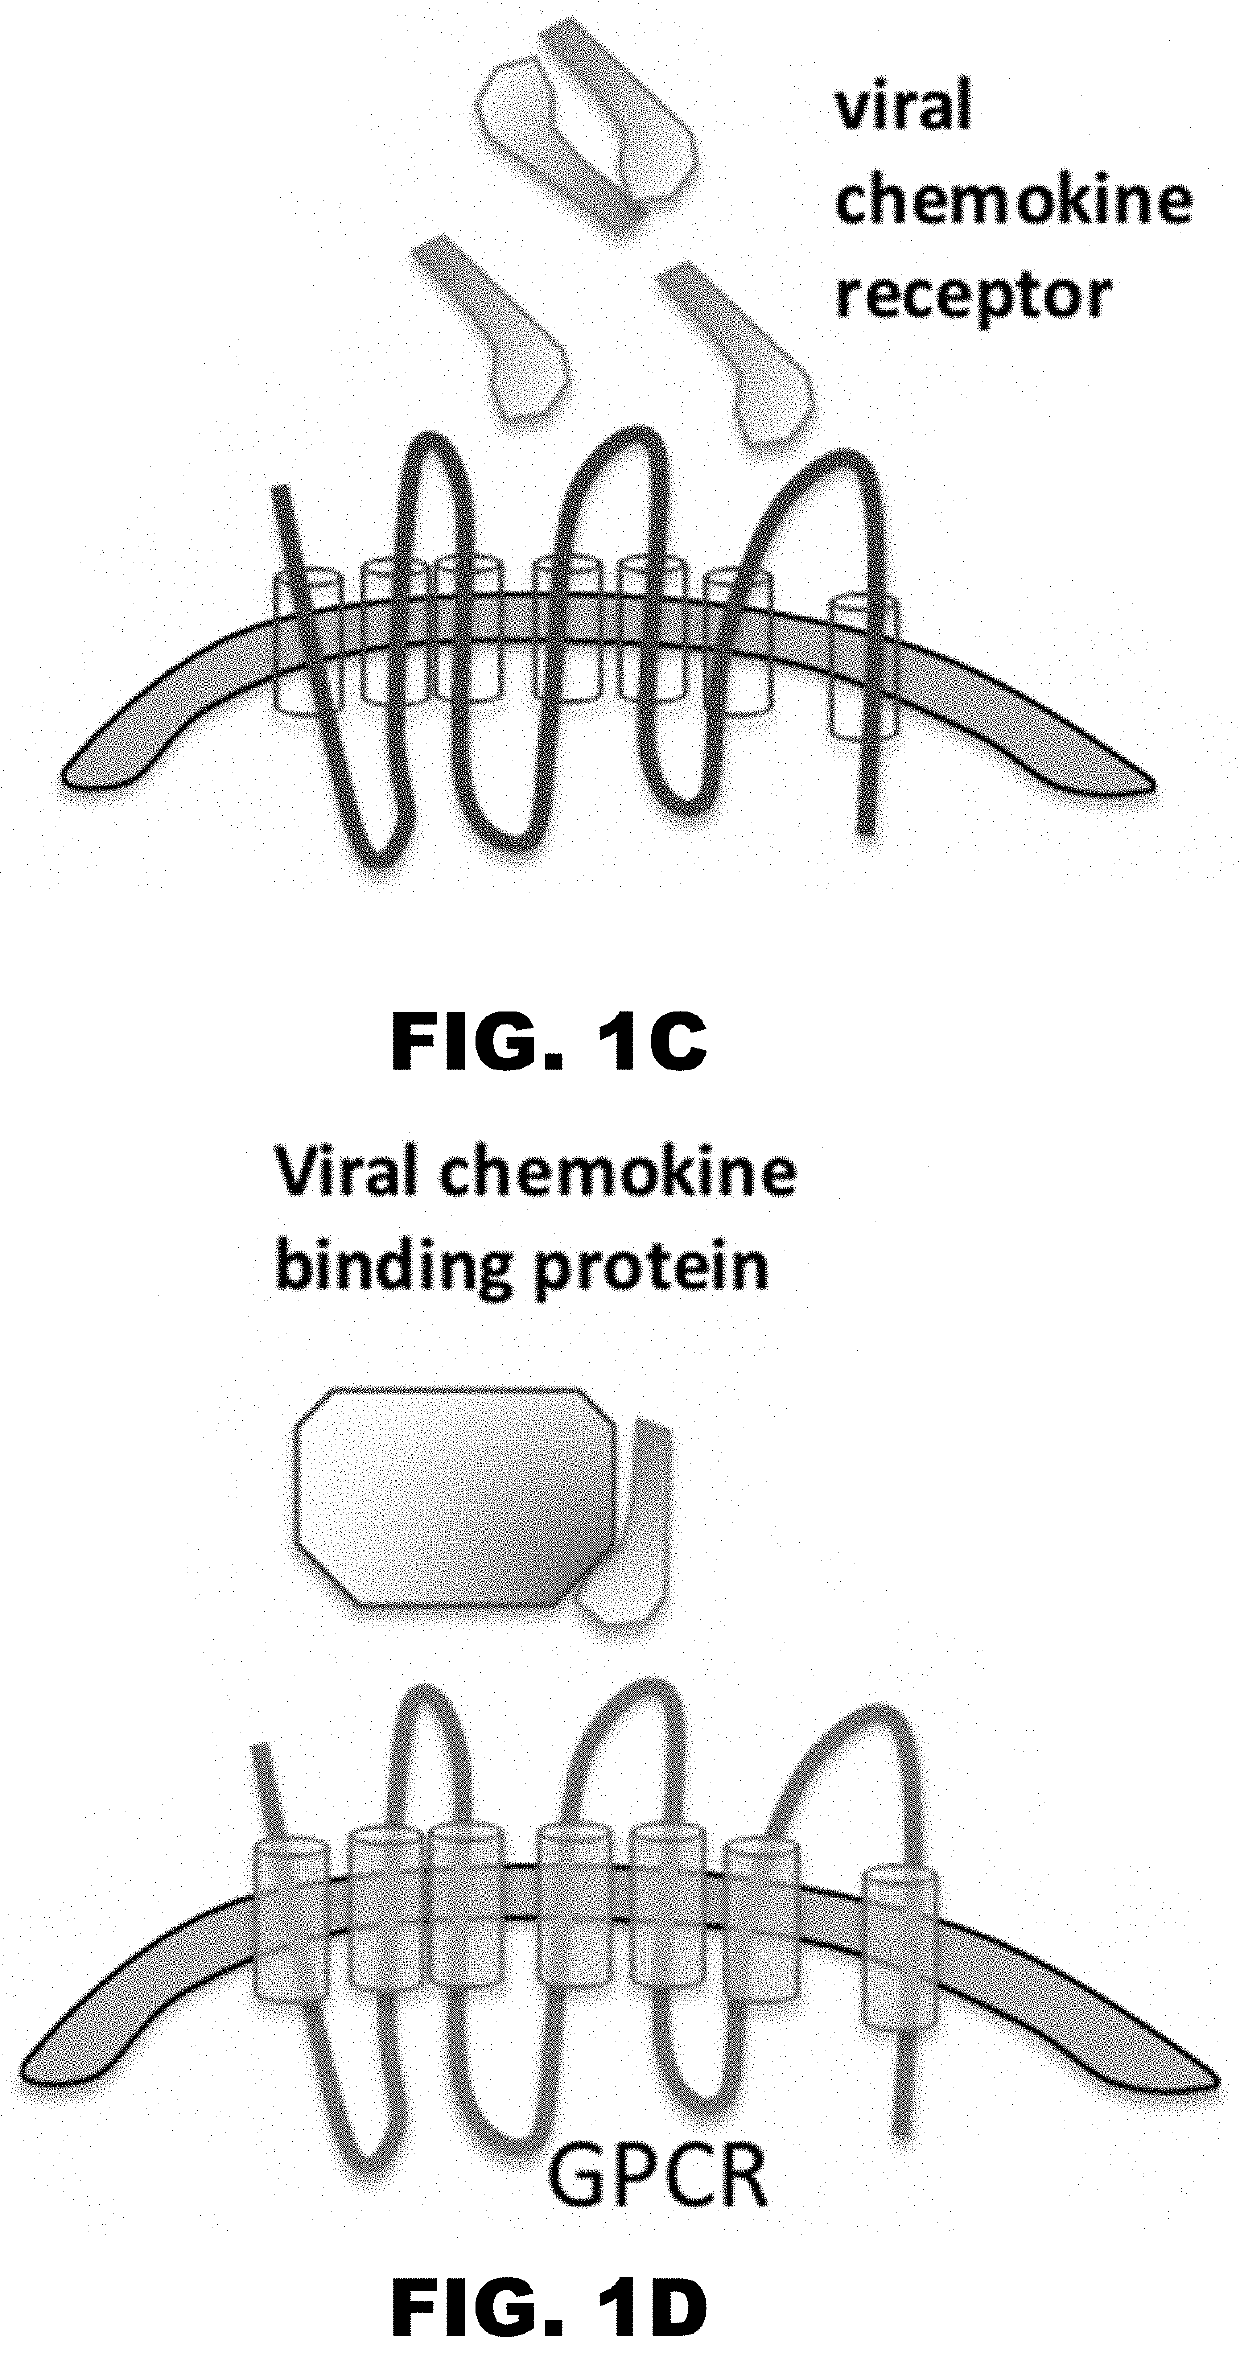 Chemokine decoy receptors of rodent gammaherpesviruses and uses thereof